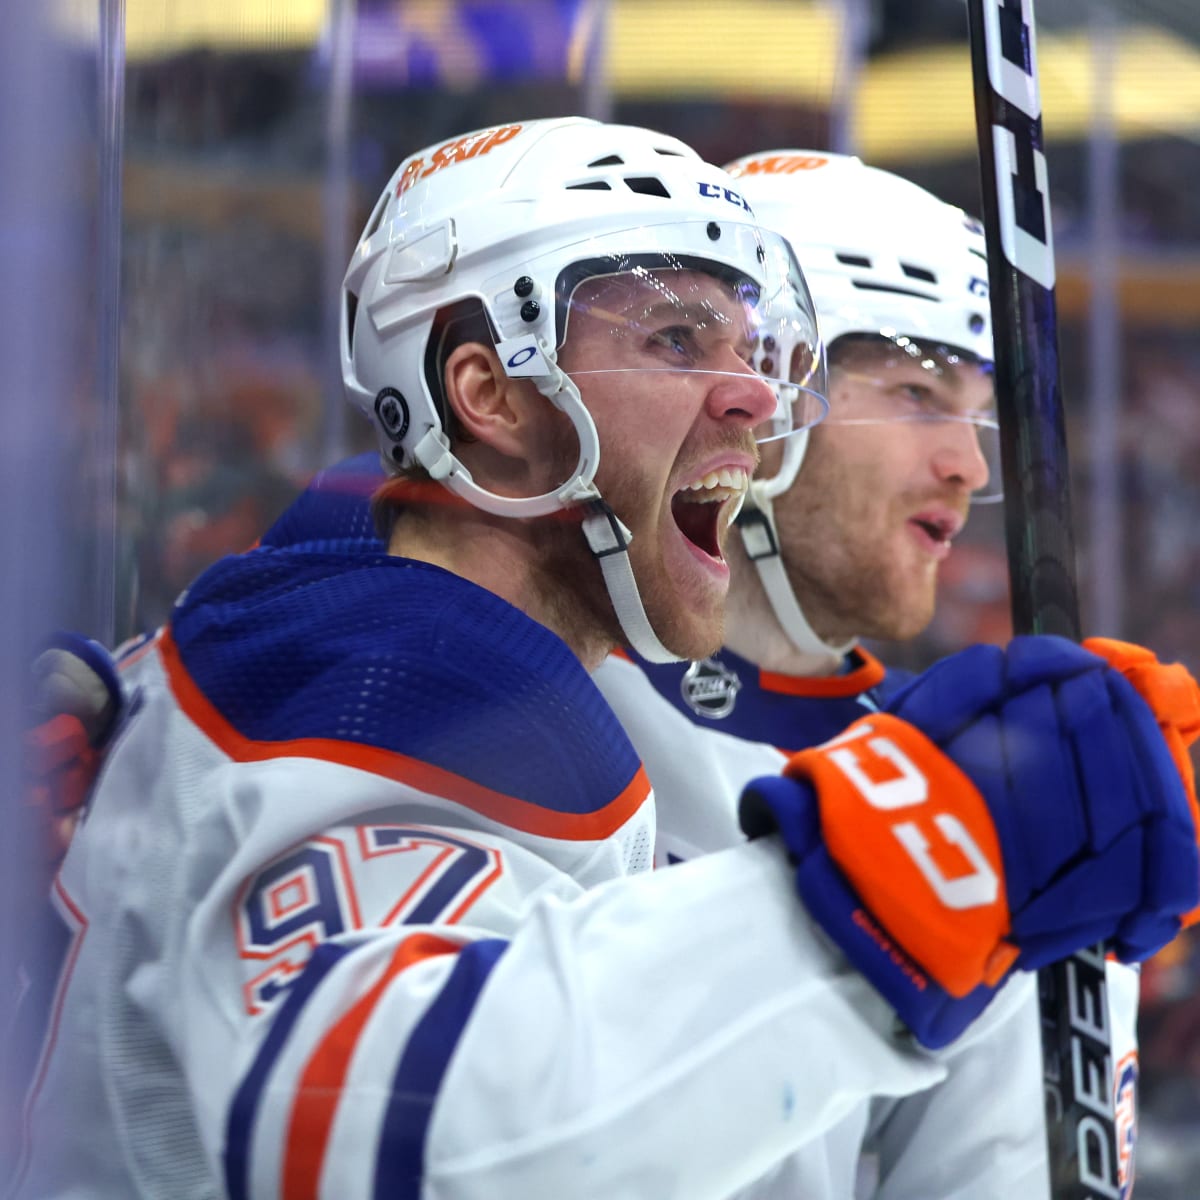 NHL 20: The best centers in the game - McDavid, Crosby, MacKinnon